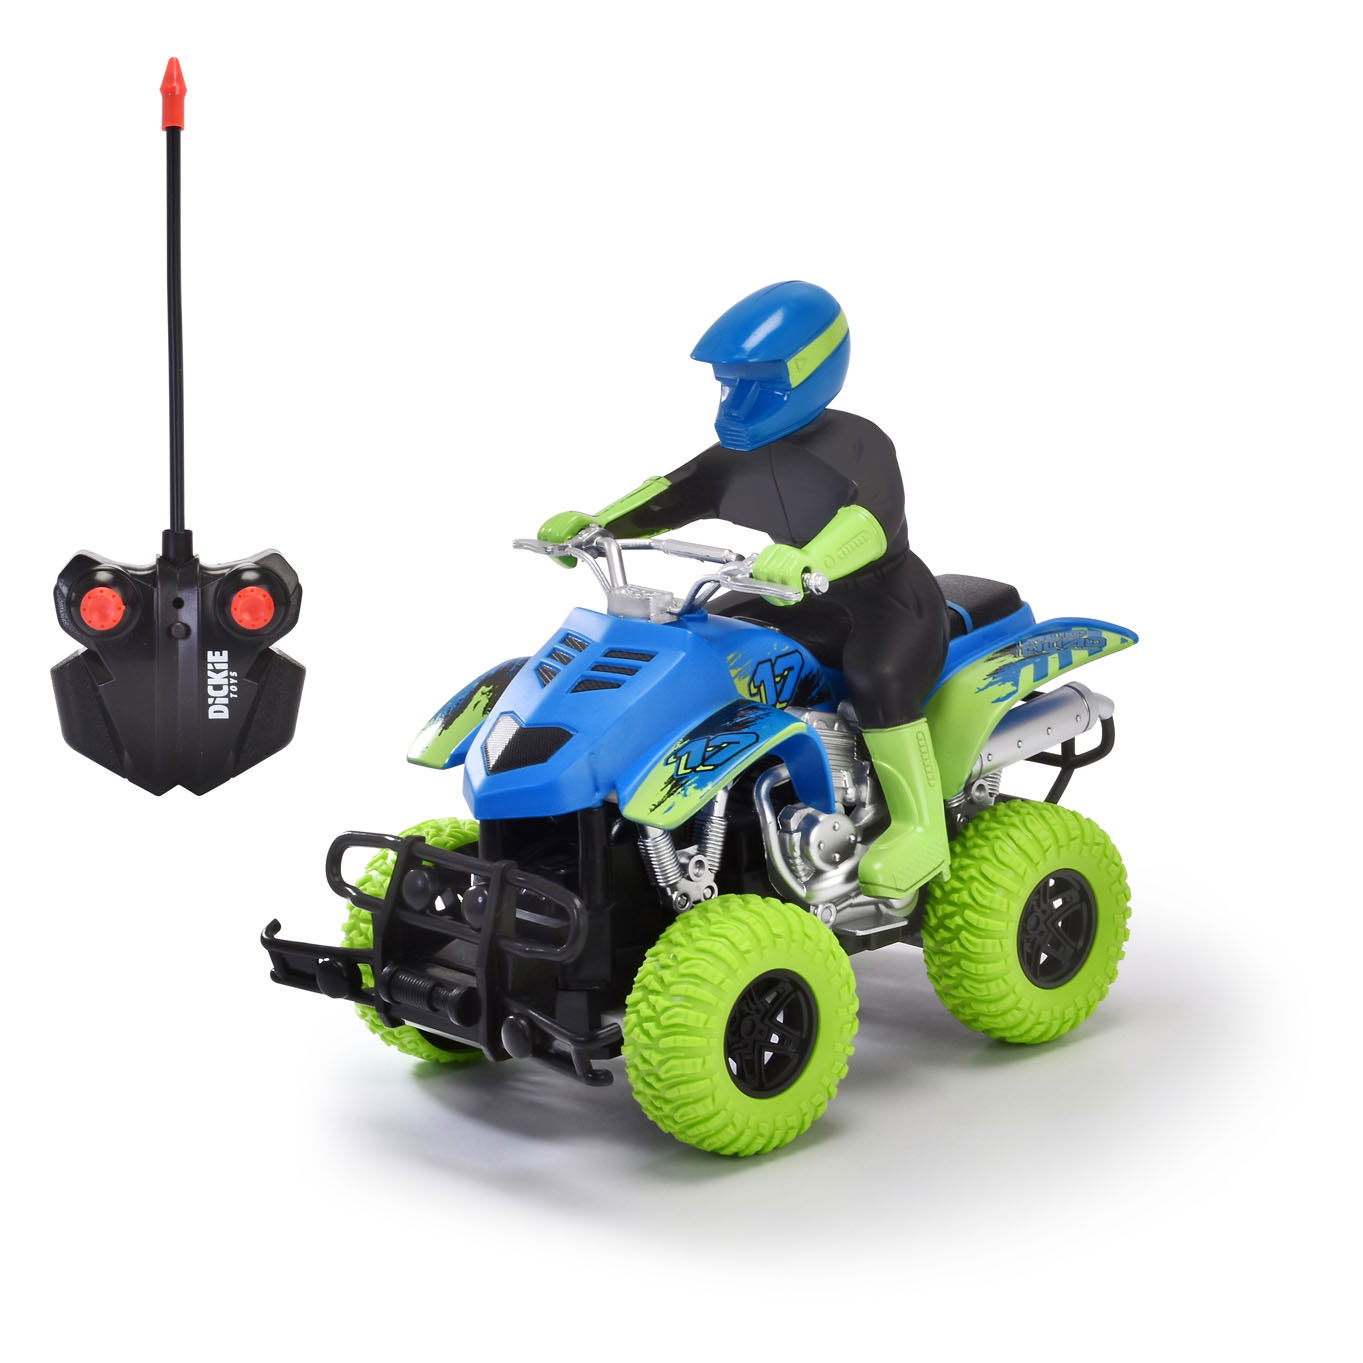 Dickie RC Offroad Quad Steerable Car | Thimble Toys